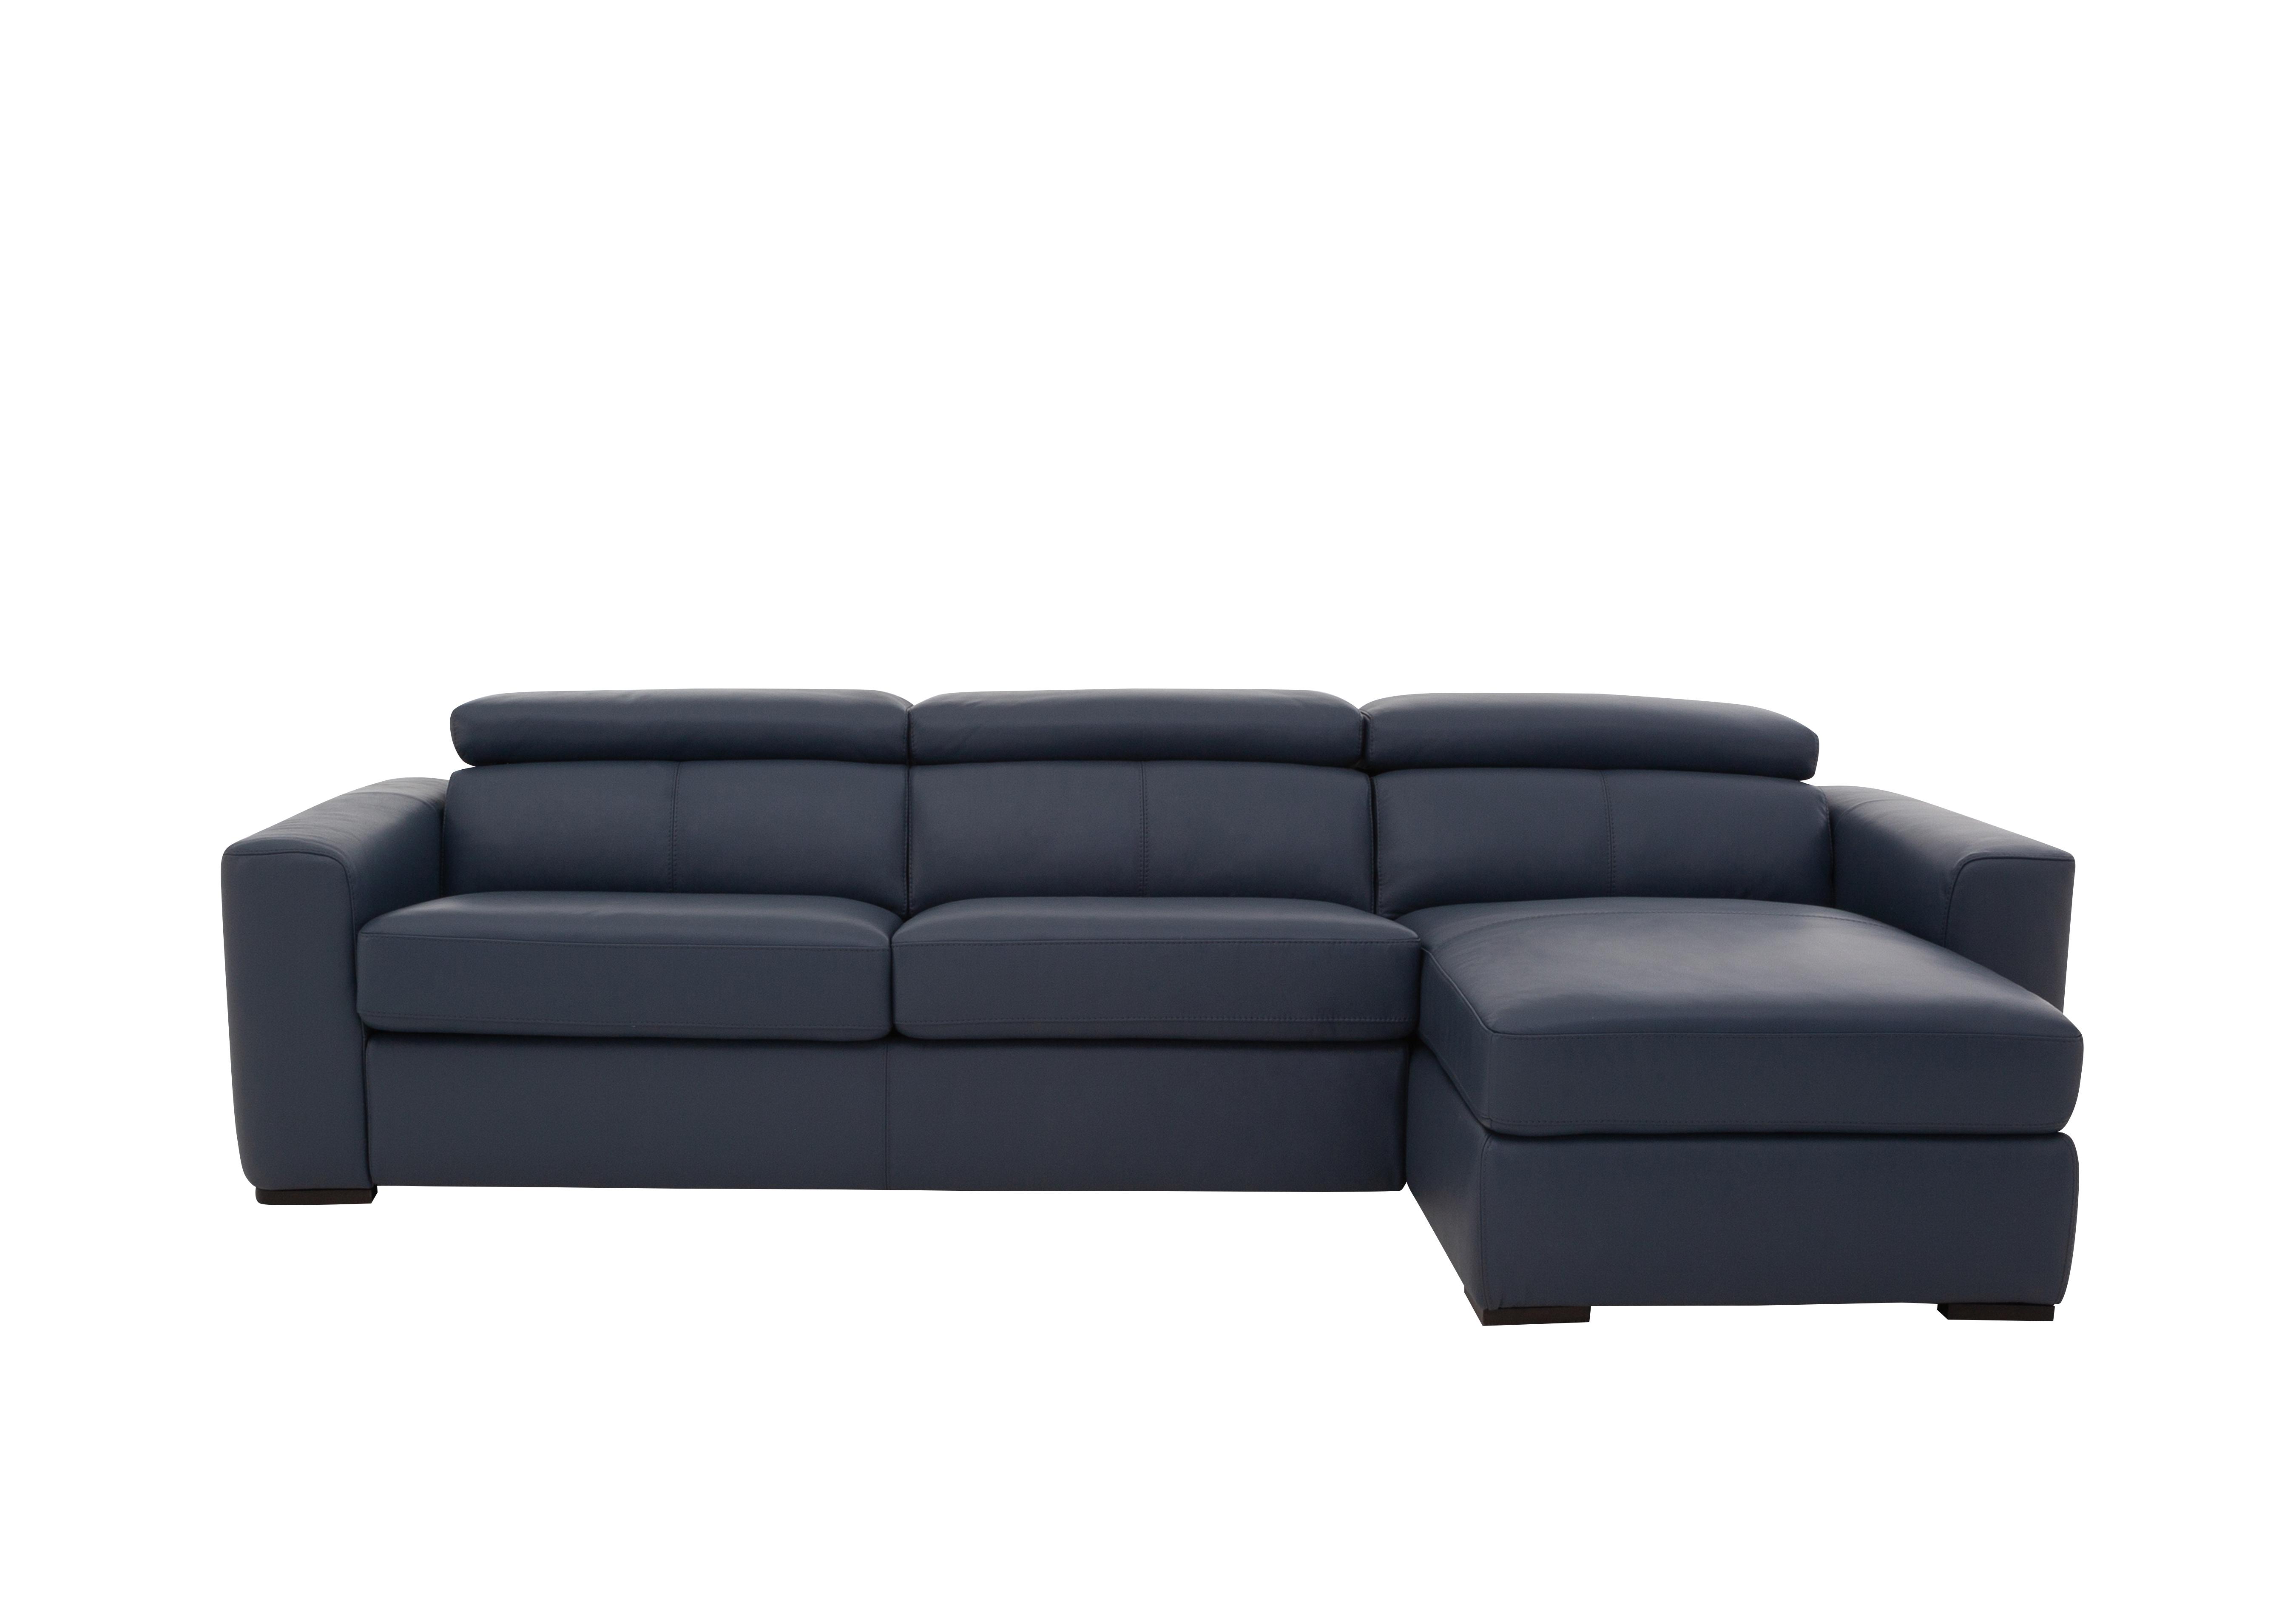 Infinity Leather Corner Chaise Sofabed with Storage in Nc-313e Ocean Blue on Furniture Village